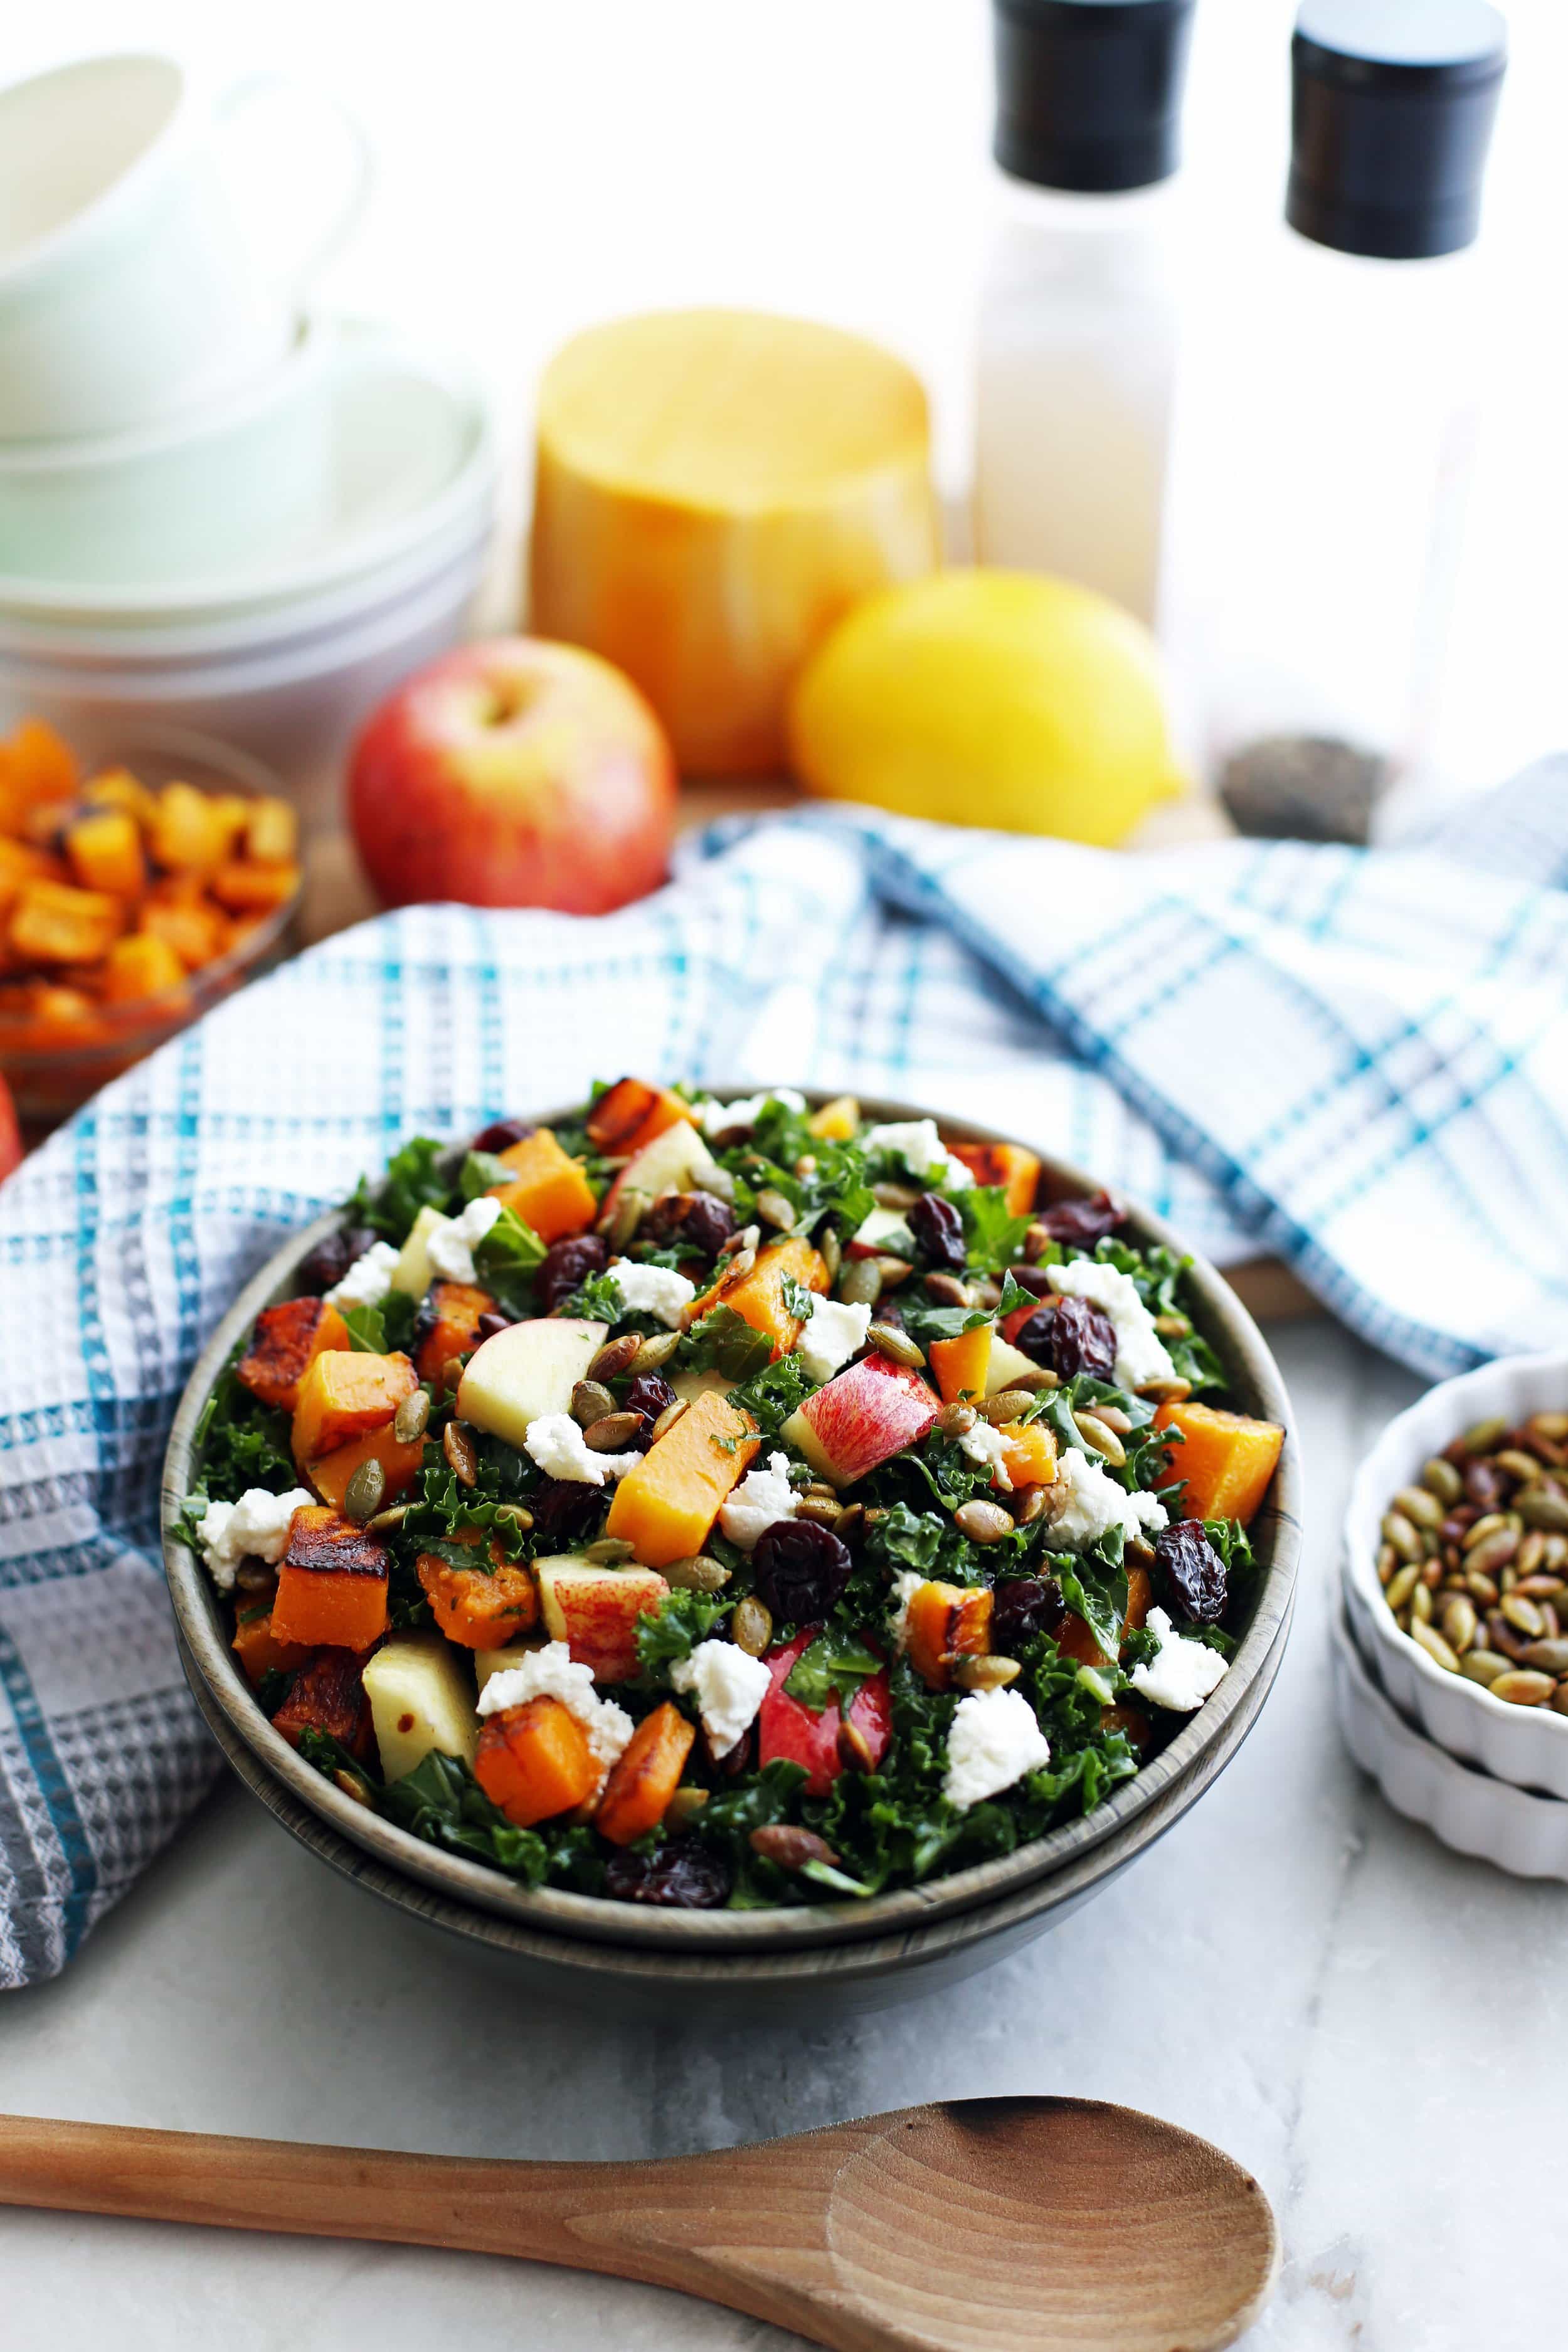 Bowl of kale salad with roasted butternut squash, apple, goat cheese, pumpkin seeds, and dried cherries.